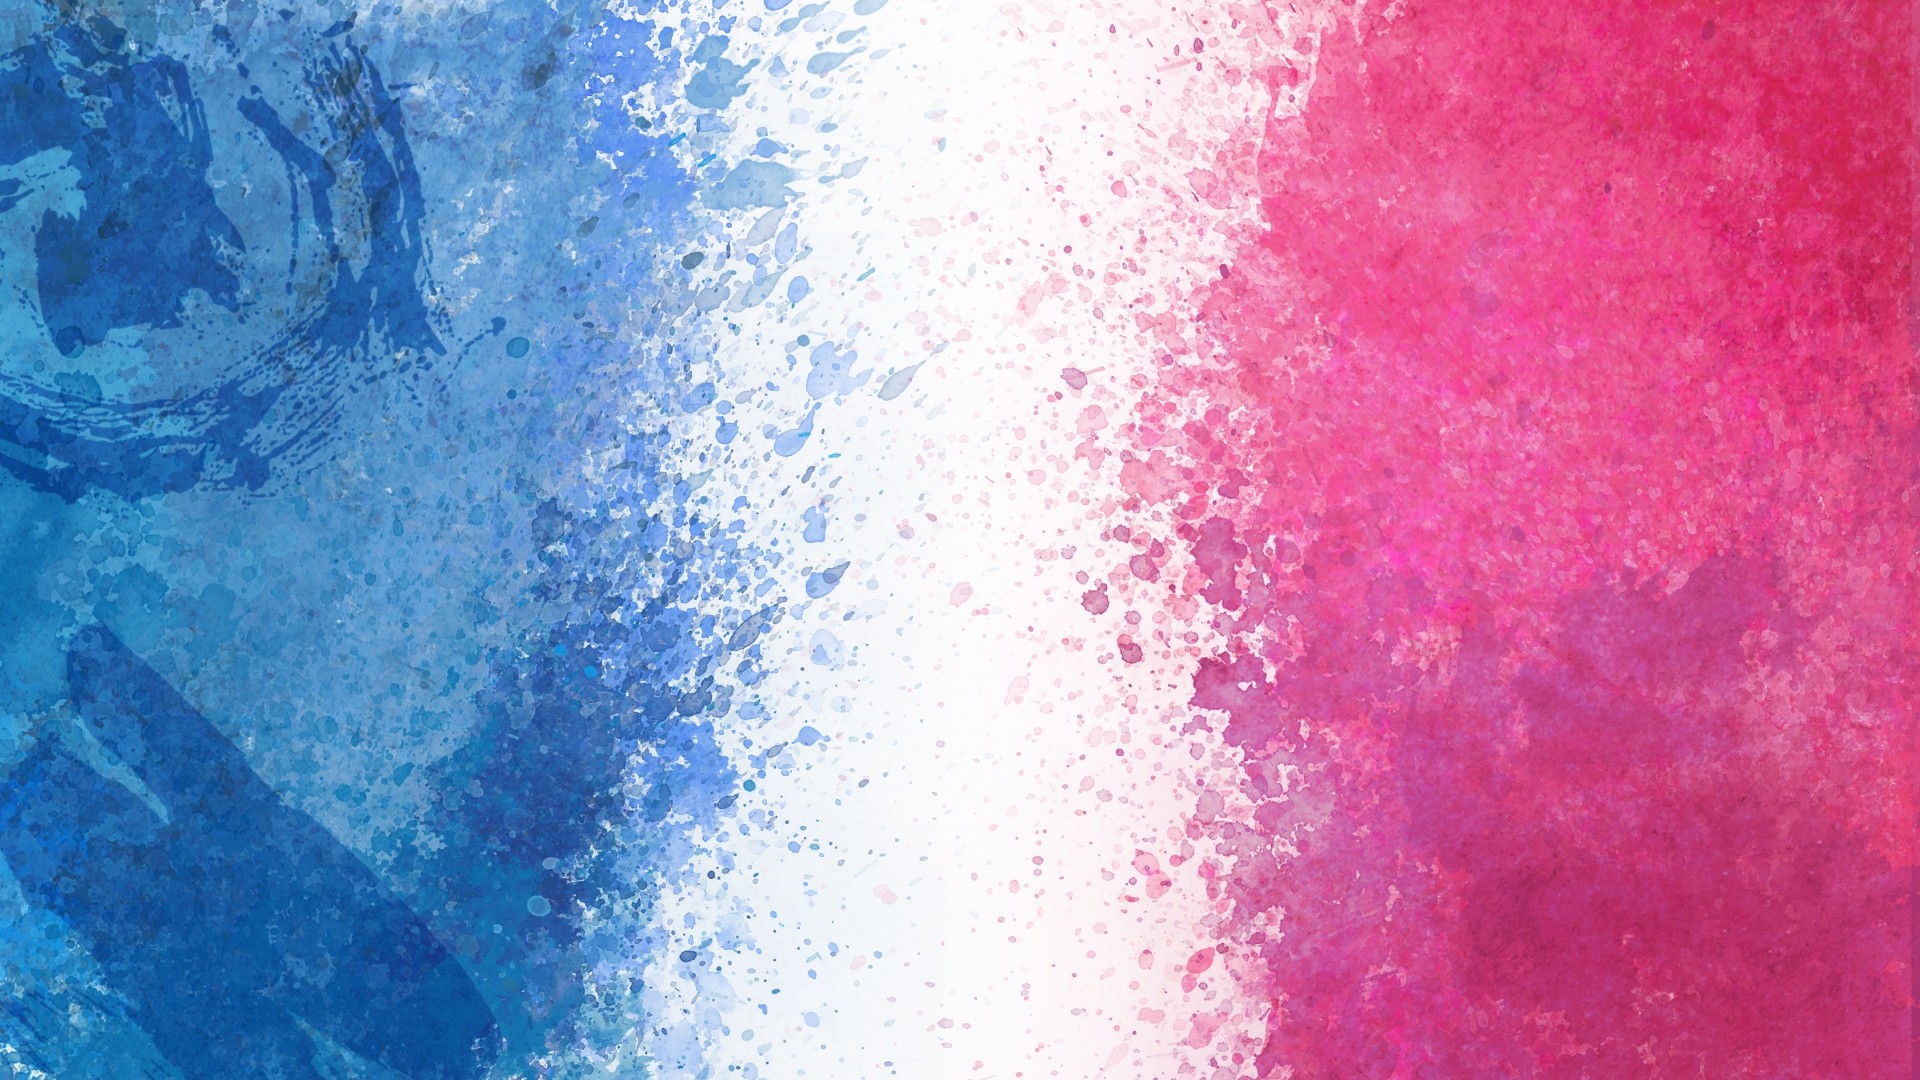 Pink And Blue wallpaper photo hd